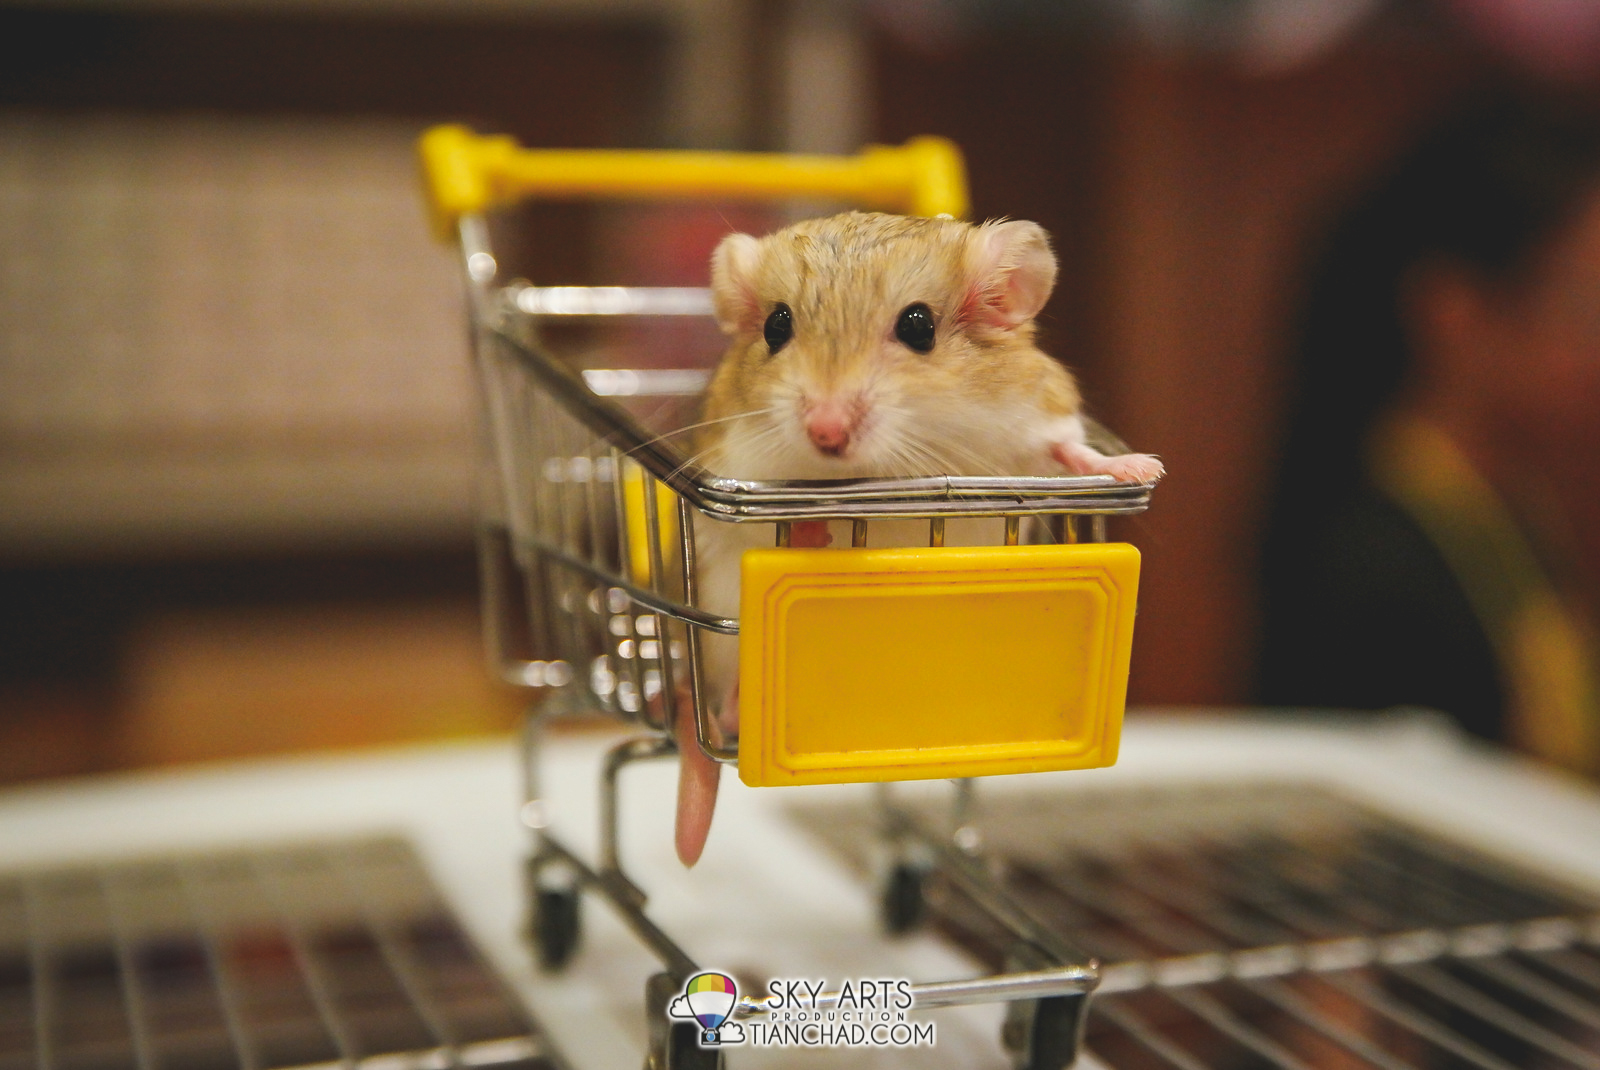 Cute mouse with long tail in a trolly